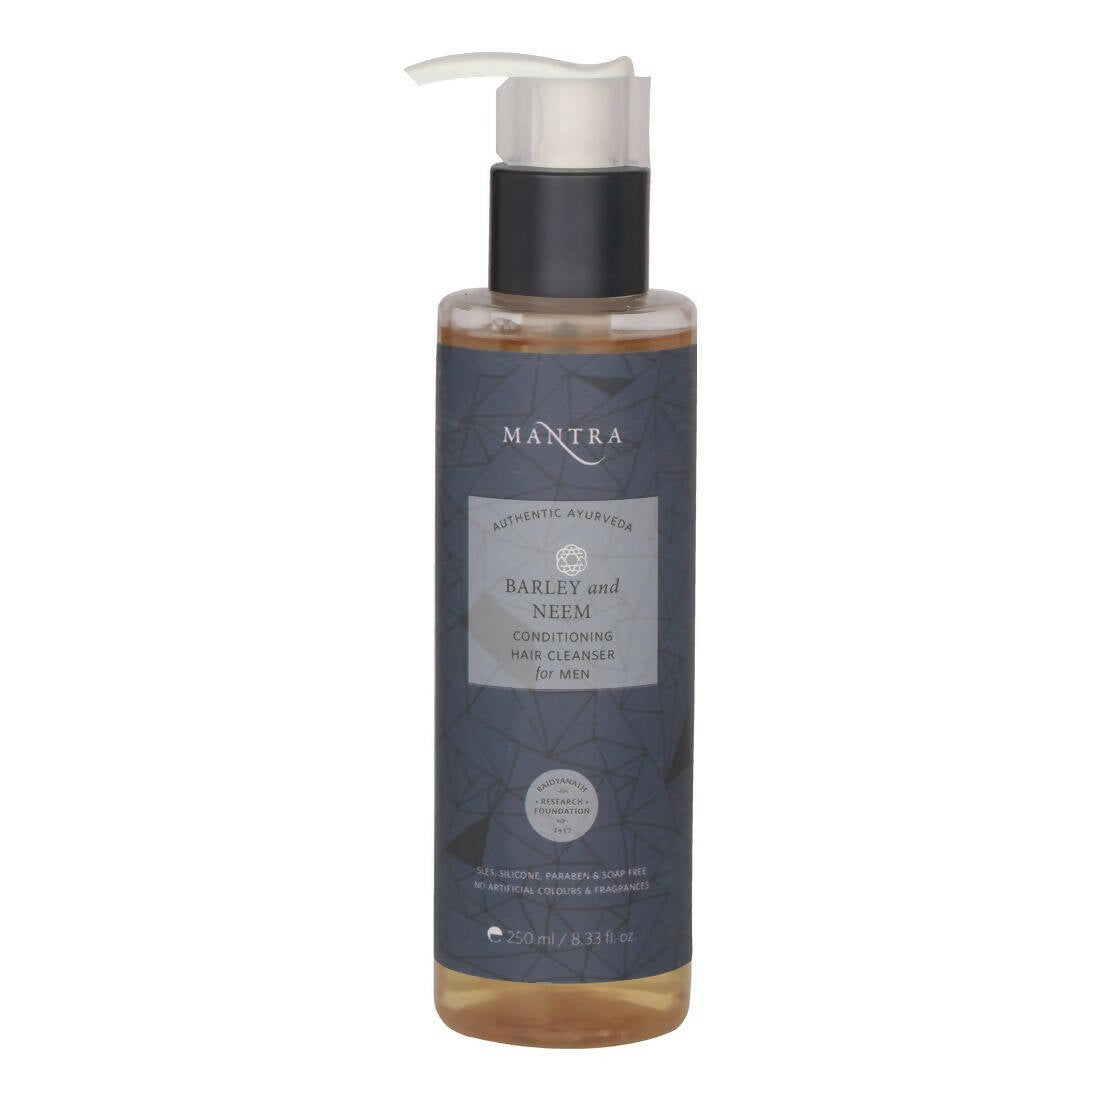 Mantra Herbal Barley and Neem Conditioning Hair Cleanser For Men - BUDEN